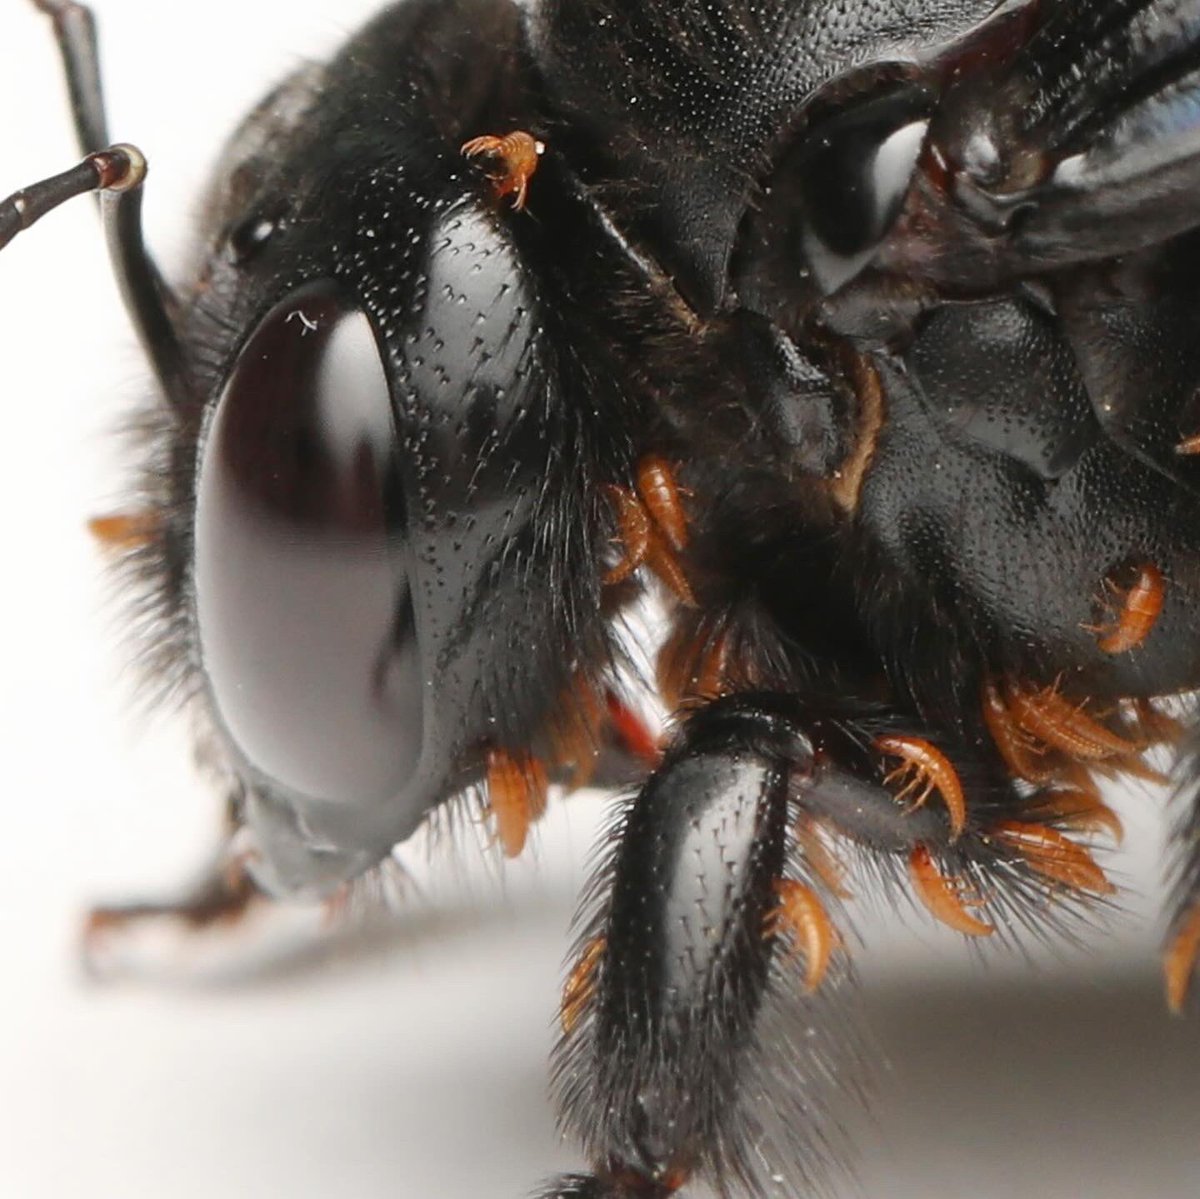 When I first saw this Xylocopa I thought it had orange pollen on its body. After a closer look, it’s not pollen, but parasitic triungulin larvae. These beetle larvae don’t directly harm the adult bee, they hitch a ride back to the nest and feed on the pollen and eggs. creepy